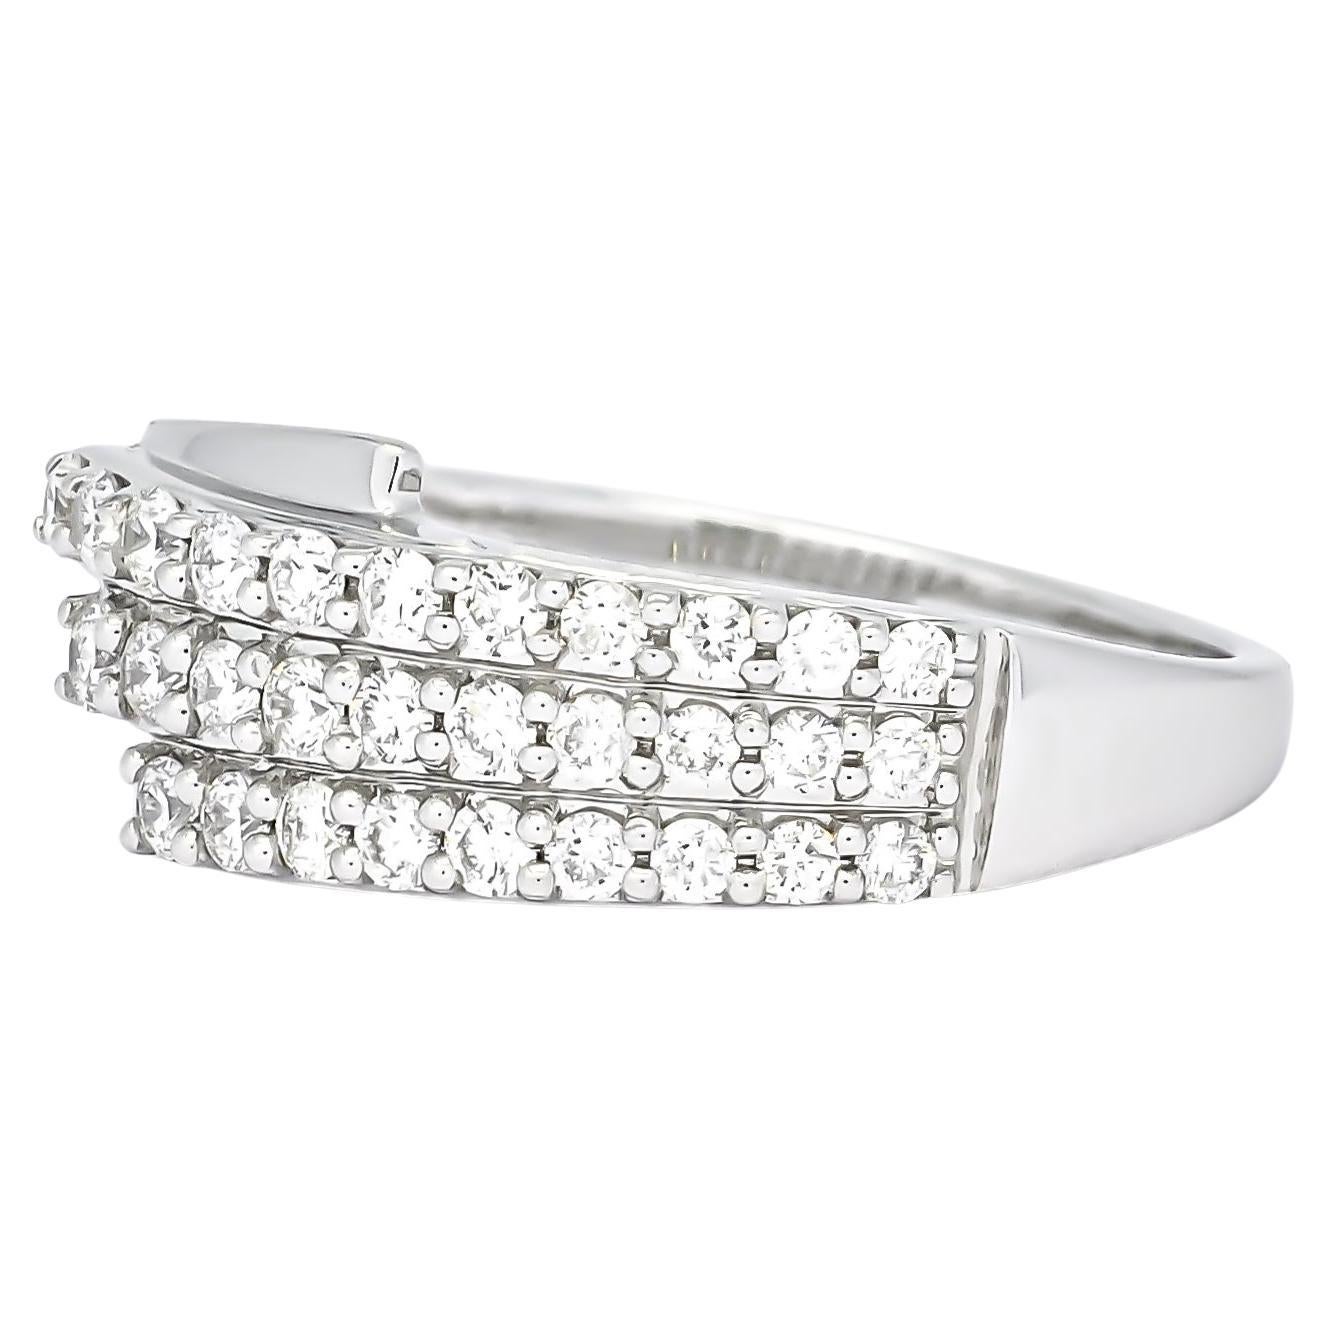 Immerse yourself in the captivating allure of this stunning 18K white gold multi-row diamond ring, showcasing a lovely pave setting in an accented designer style that radiates sparkle and sophistication. Totaling 0.55 carats, the diamonds in this